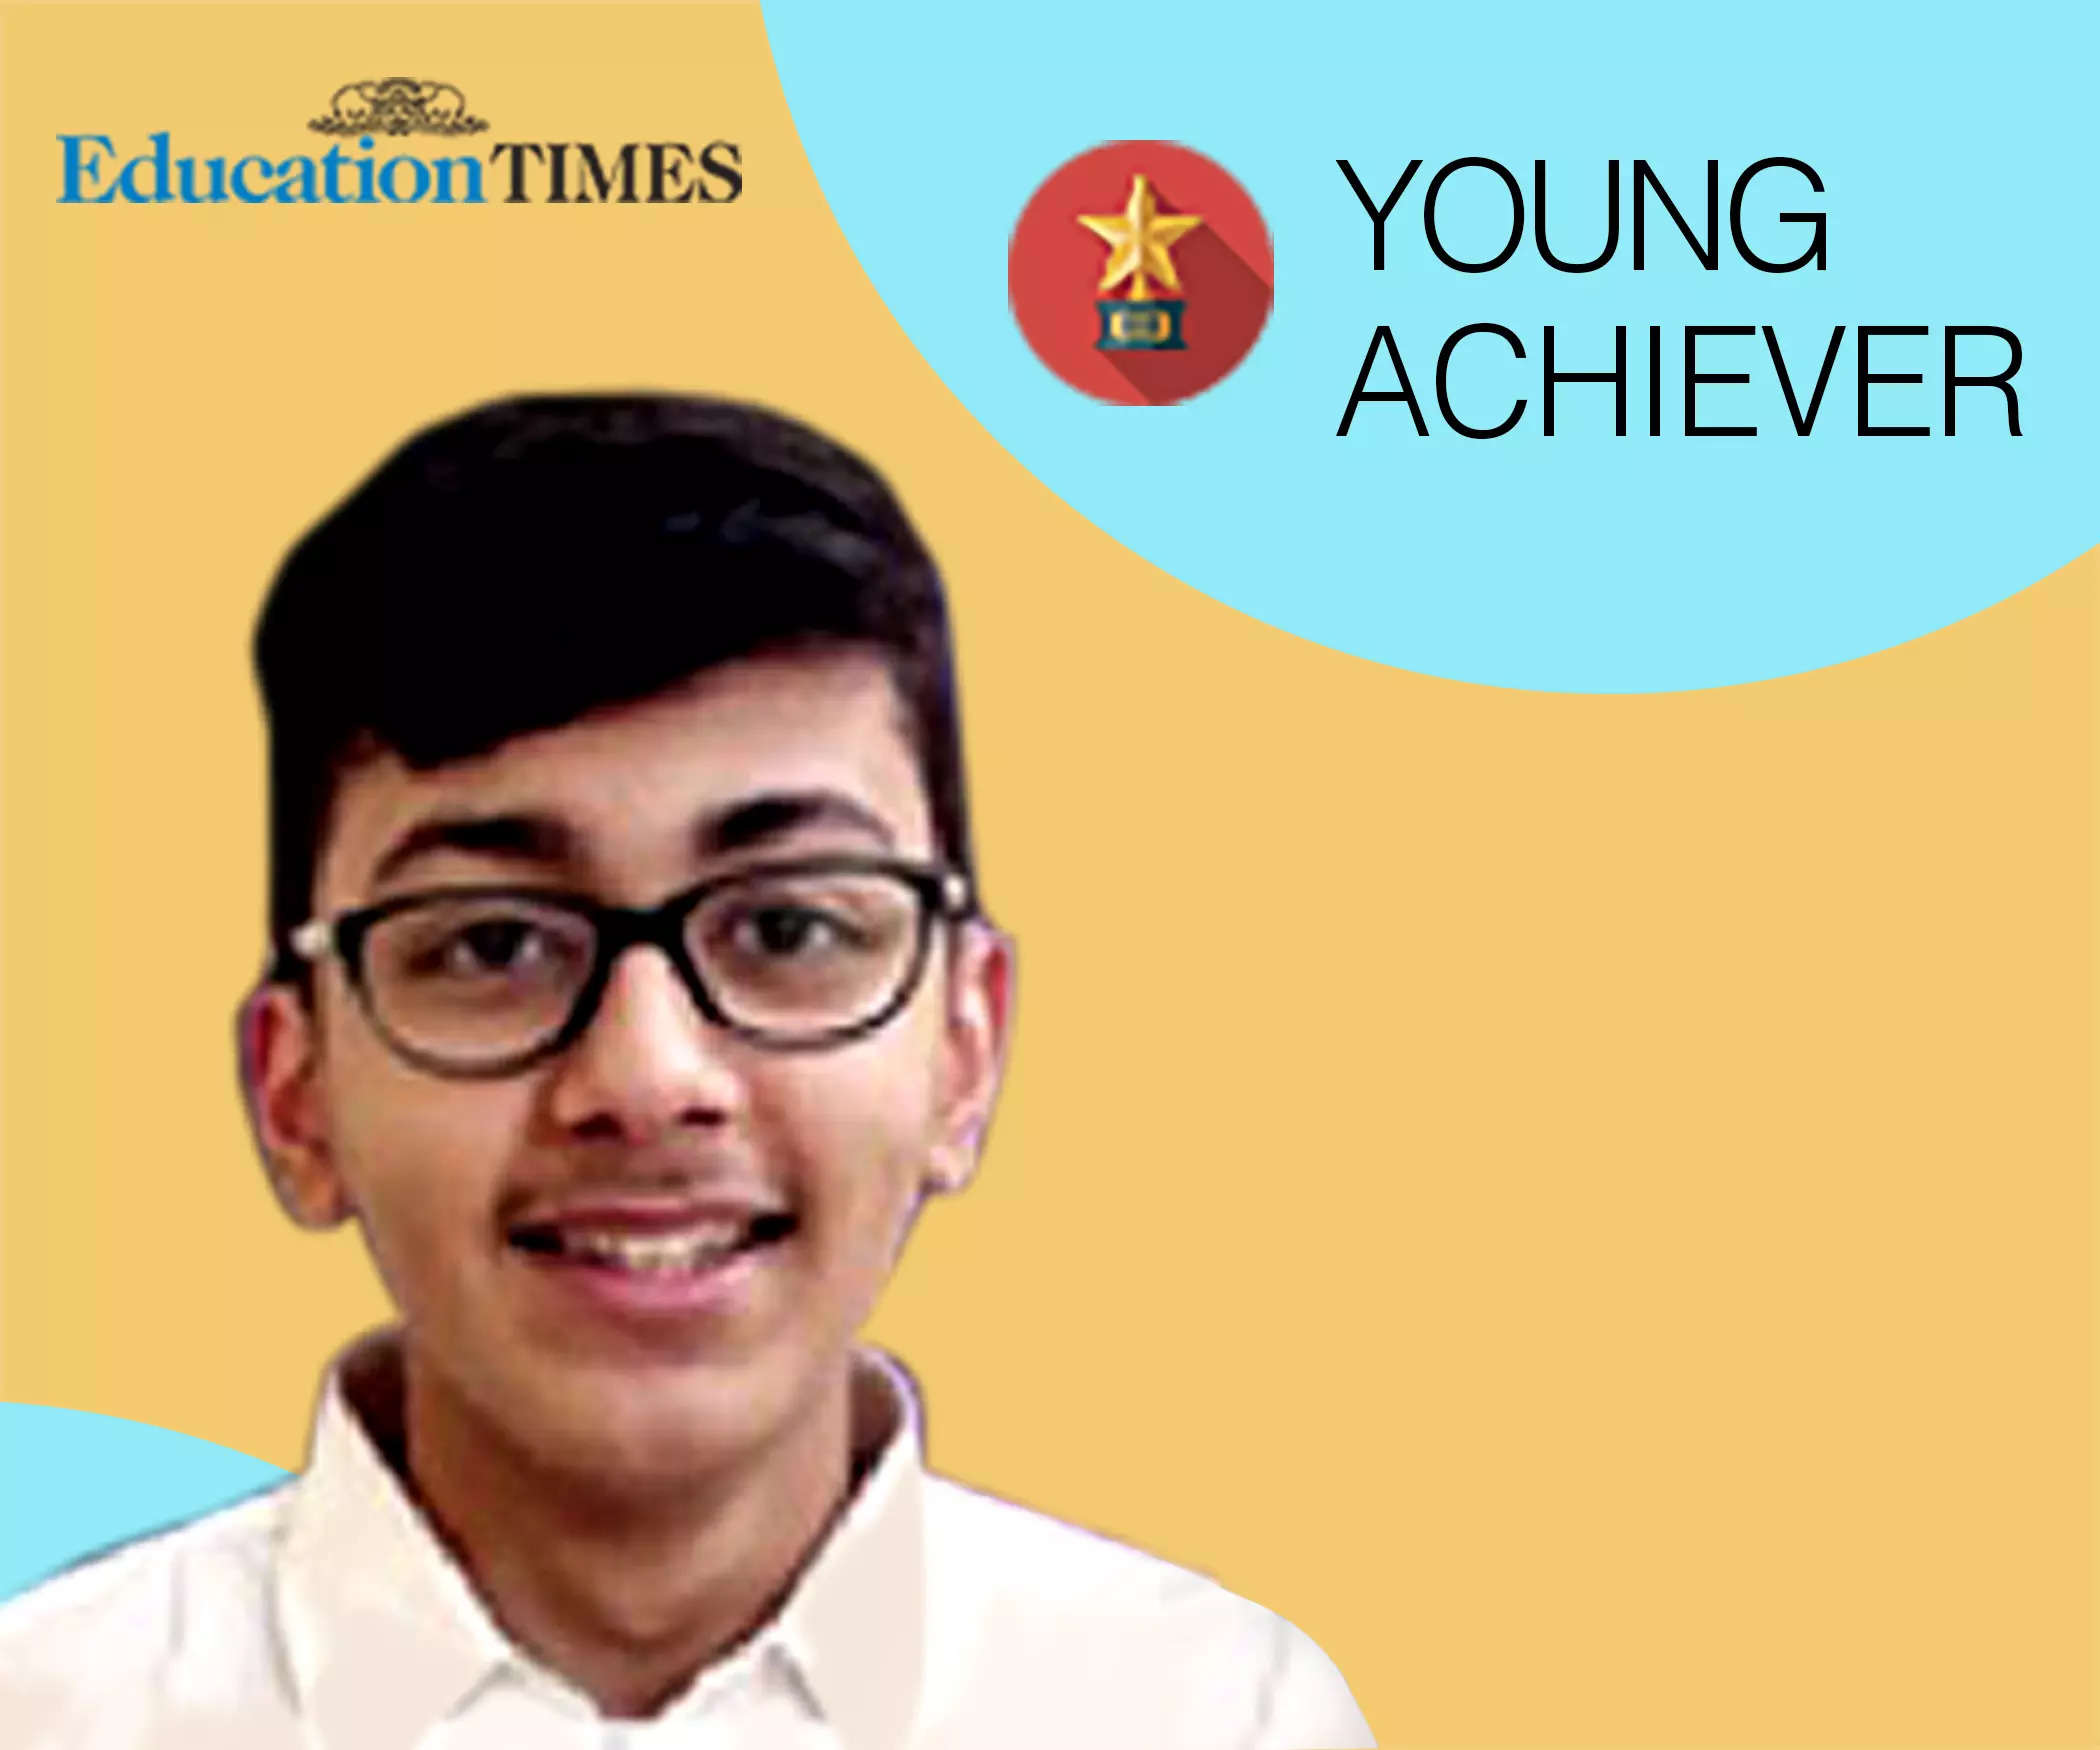 Young achievers: Intense hard work proved fruitful, say CLAT toppers